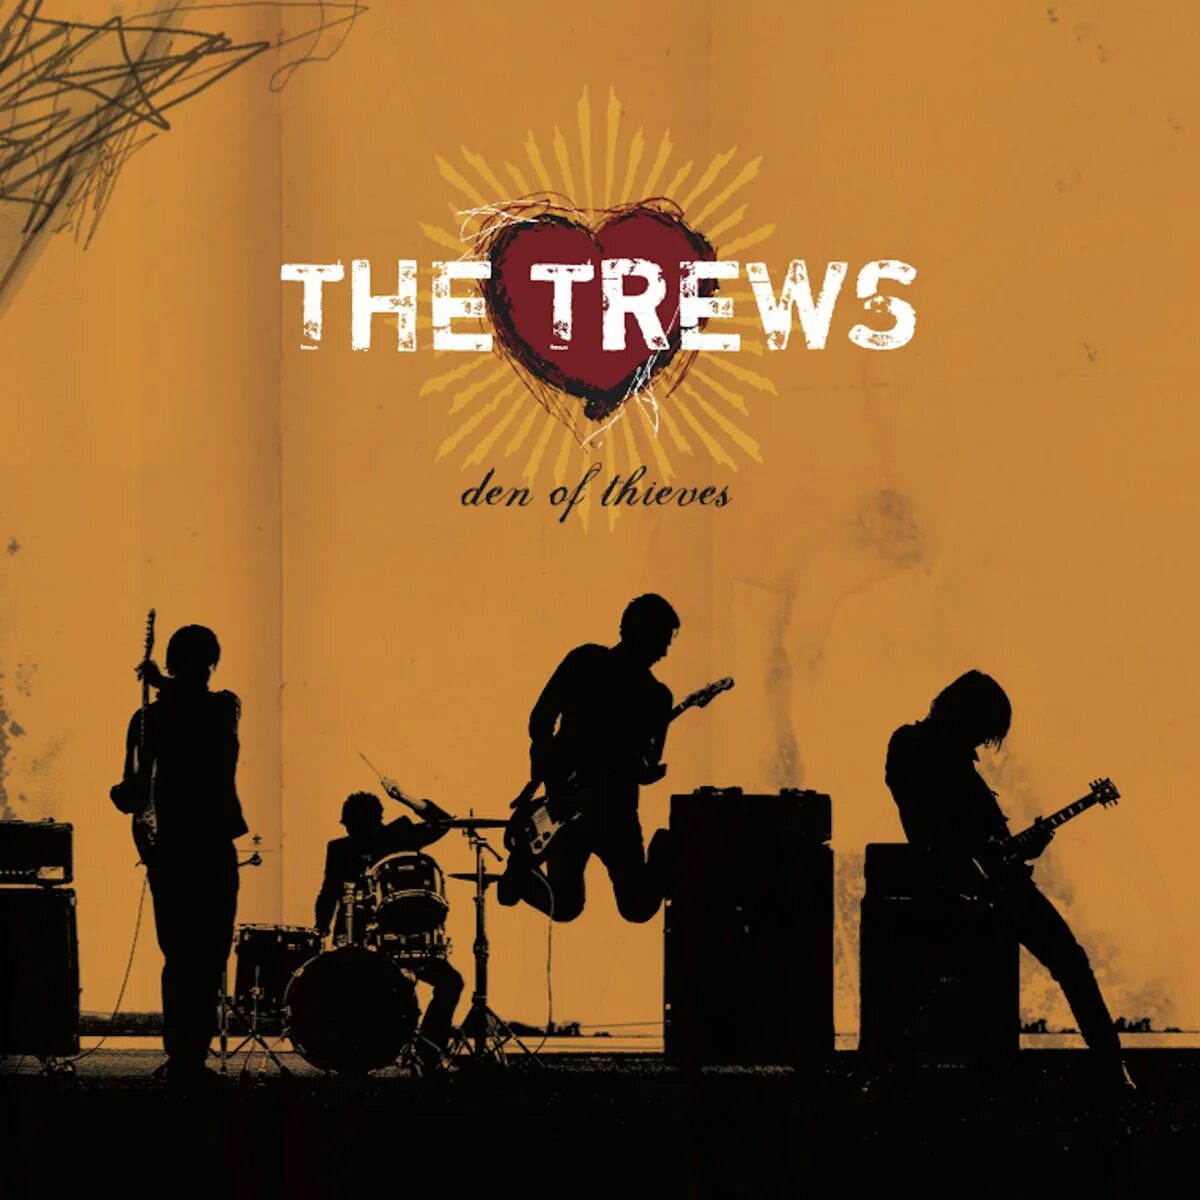 The traveling kind. Trews.